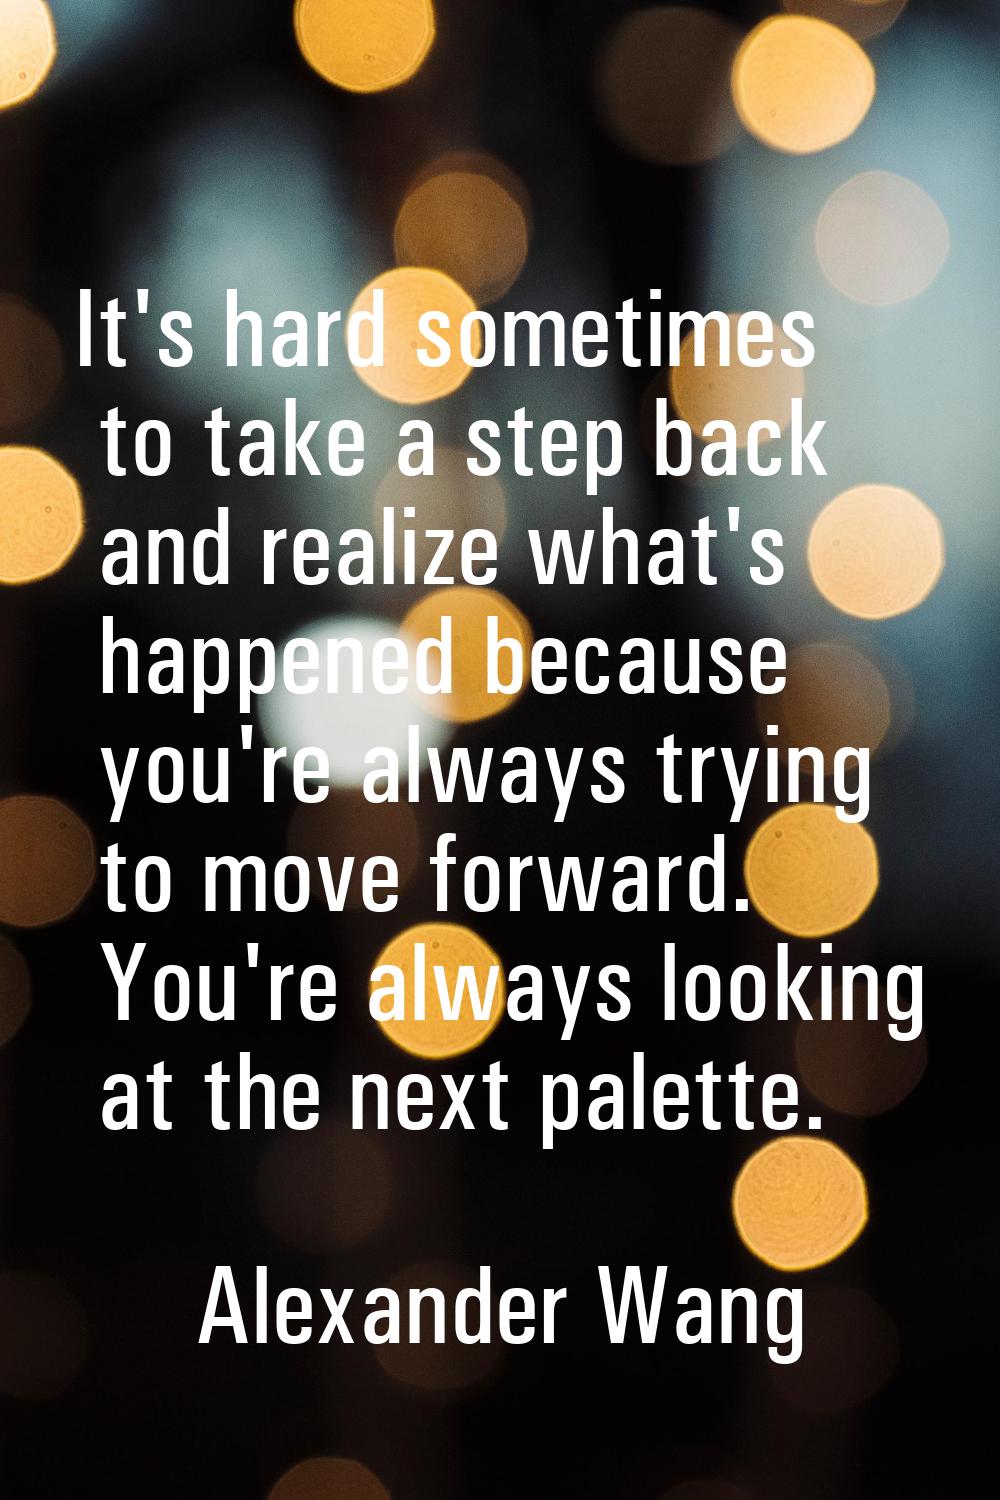 It's hard sometimes to take a step back and realize what's happened because you're always trying to